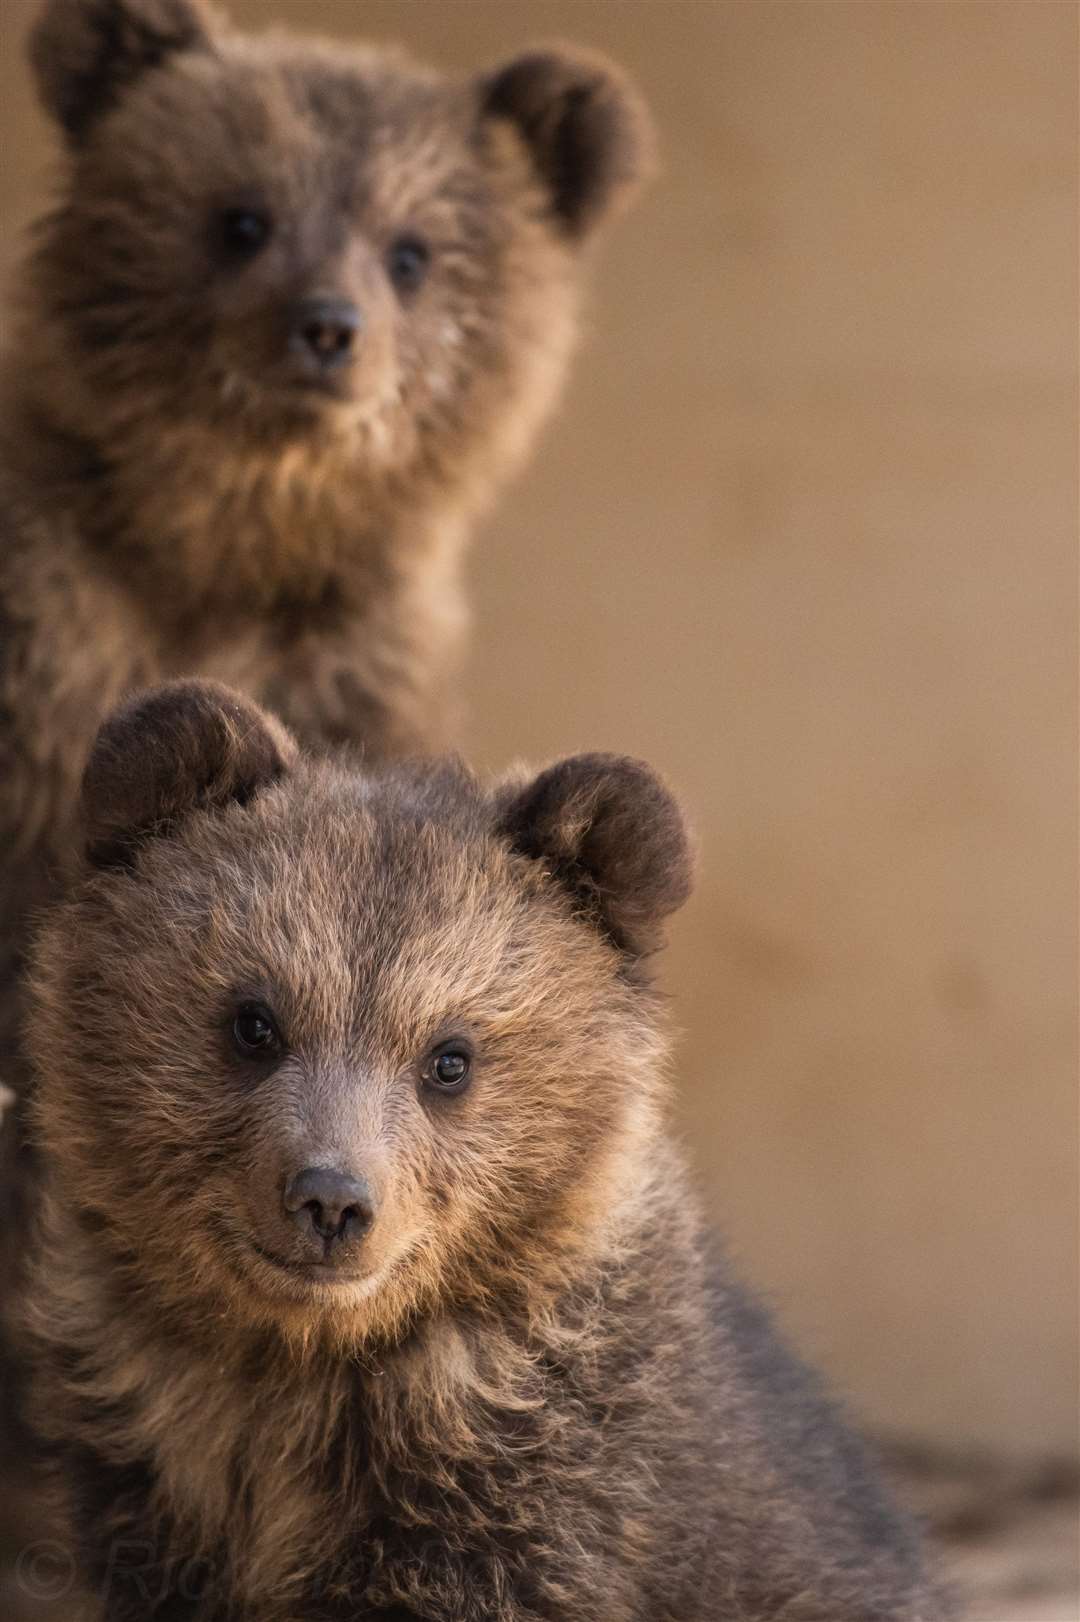 The cubs are said to have been saved from certain death. Picture: Wildwood Trust